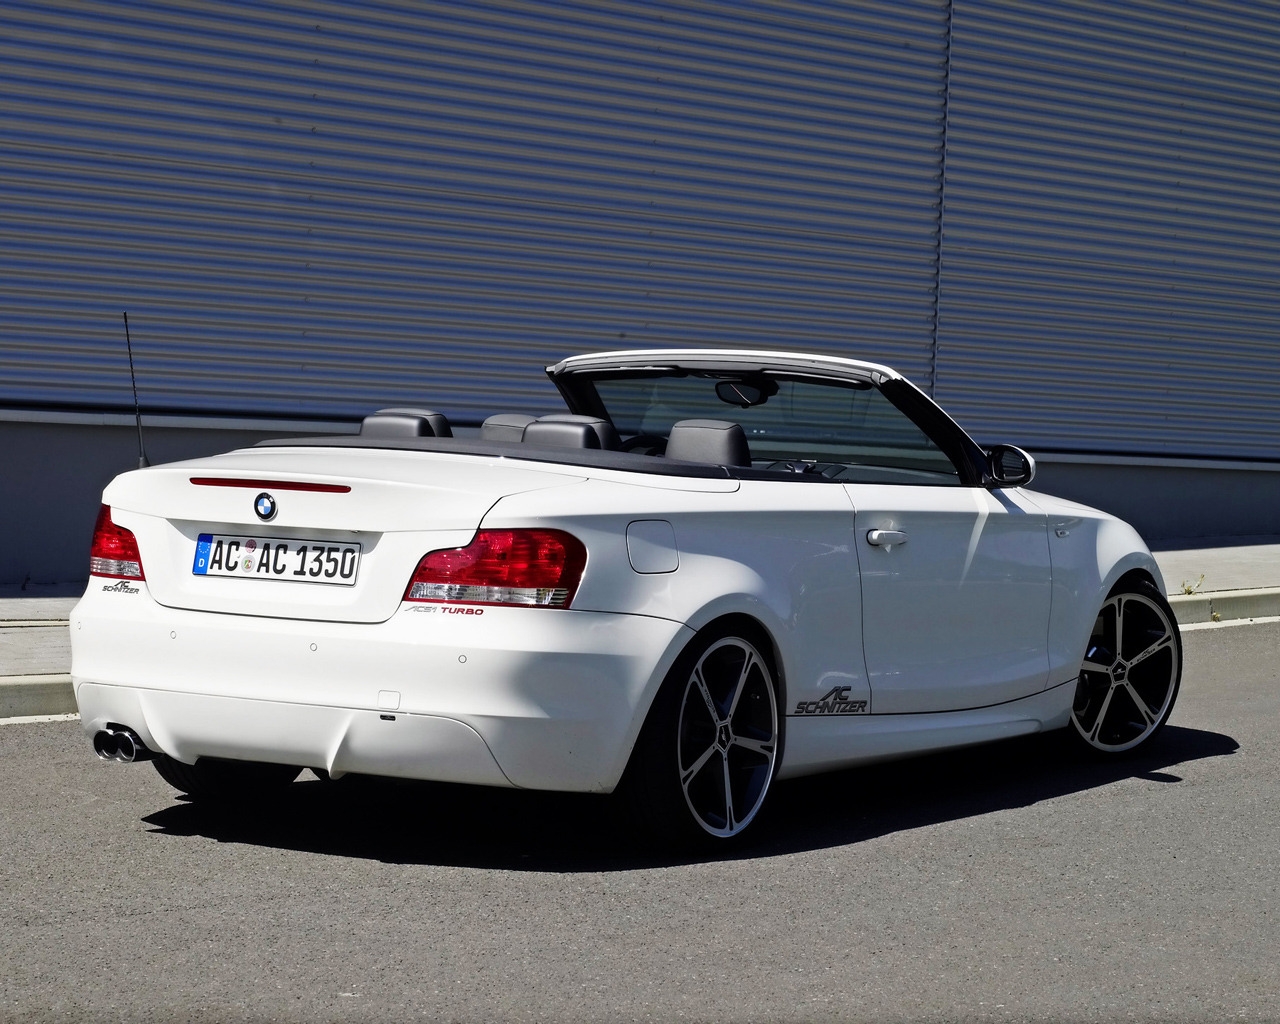 BMW 1 Series Convertible Rear Angle for 1280 x 1024 resolution